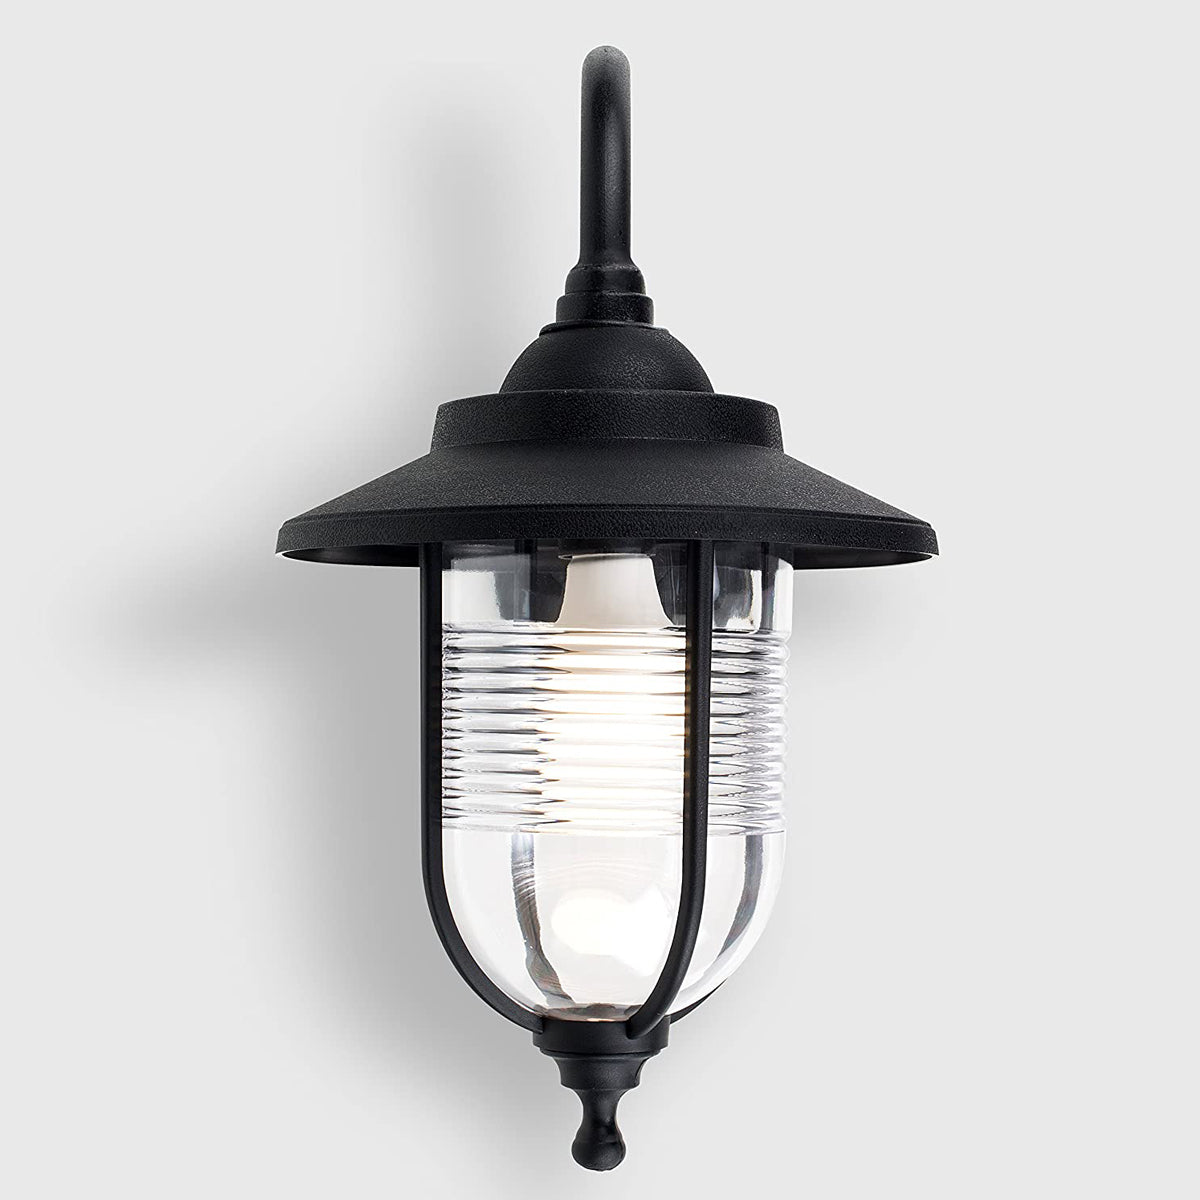 The Evelyn black fisherman hooked outdoor wall lantern light is constructed of a black weatherproof metal and features an attractive design inspired by traditional lighting styles. This lantern wall light is a great choice for illuminating doorways, porches wall or patios, creating a warm and inviting look and a safe environment. With an IP44 safety rating, the Evelyn wall light is suitable for mounting on outdoor walls.